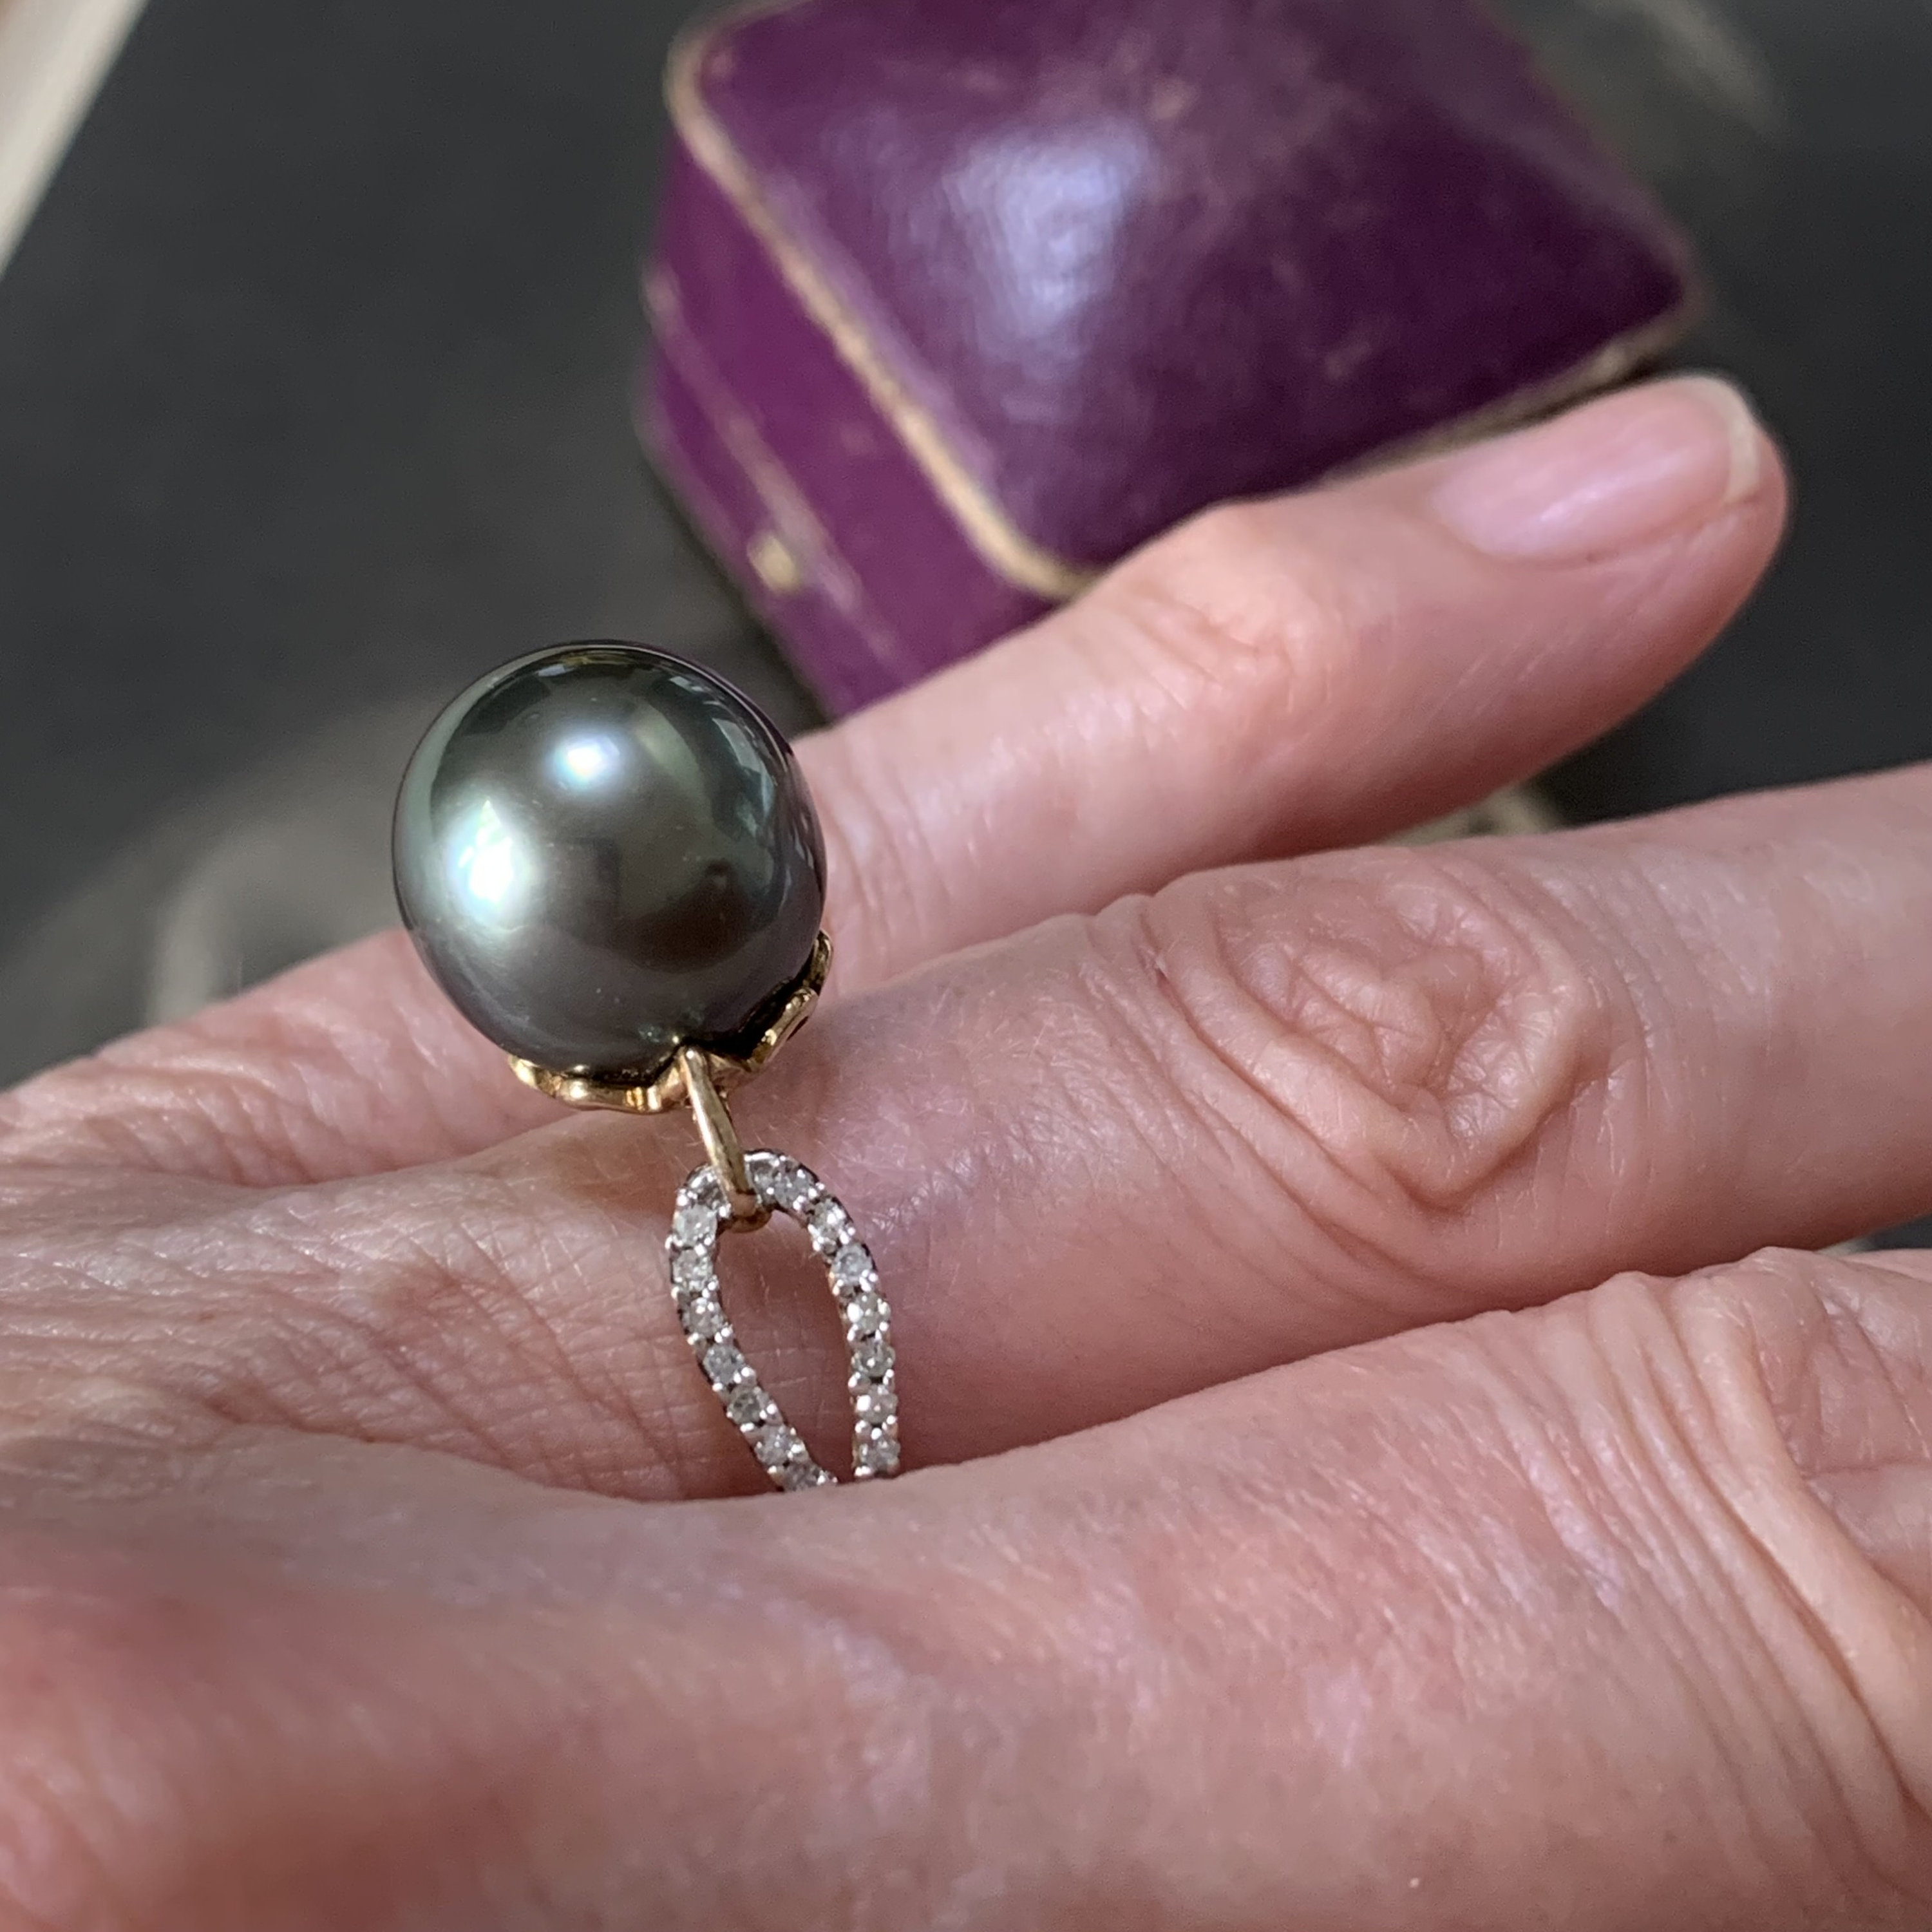 A Stunning Large South Sea Pearl Ring That Is 11.6mm in Diameter Set With 0.14Ct Diamonds. English Hallmark For 375, Birmingham